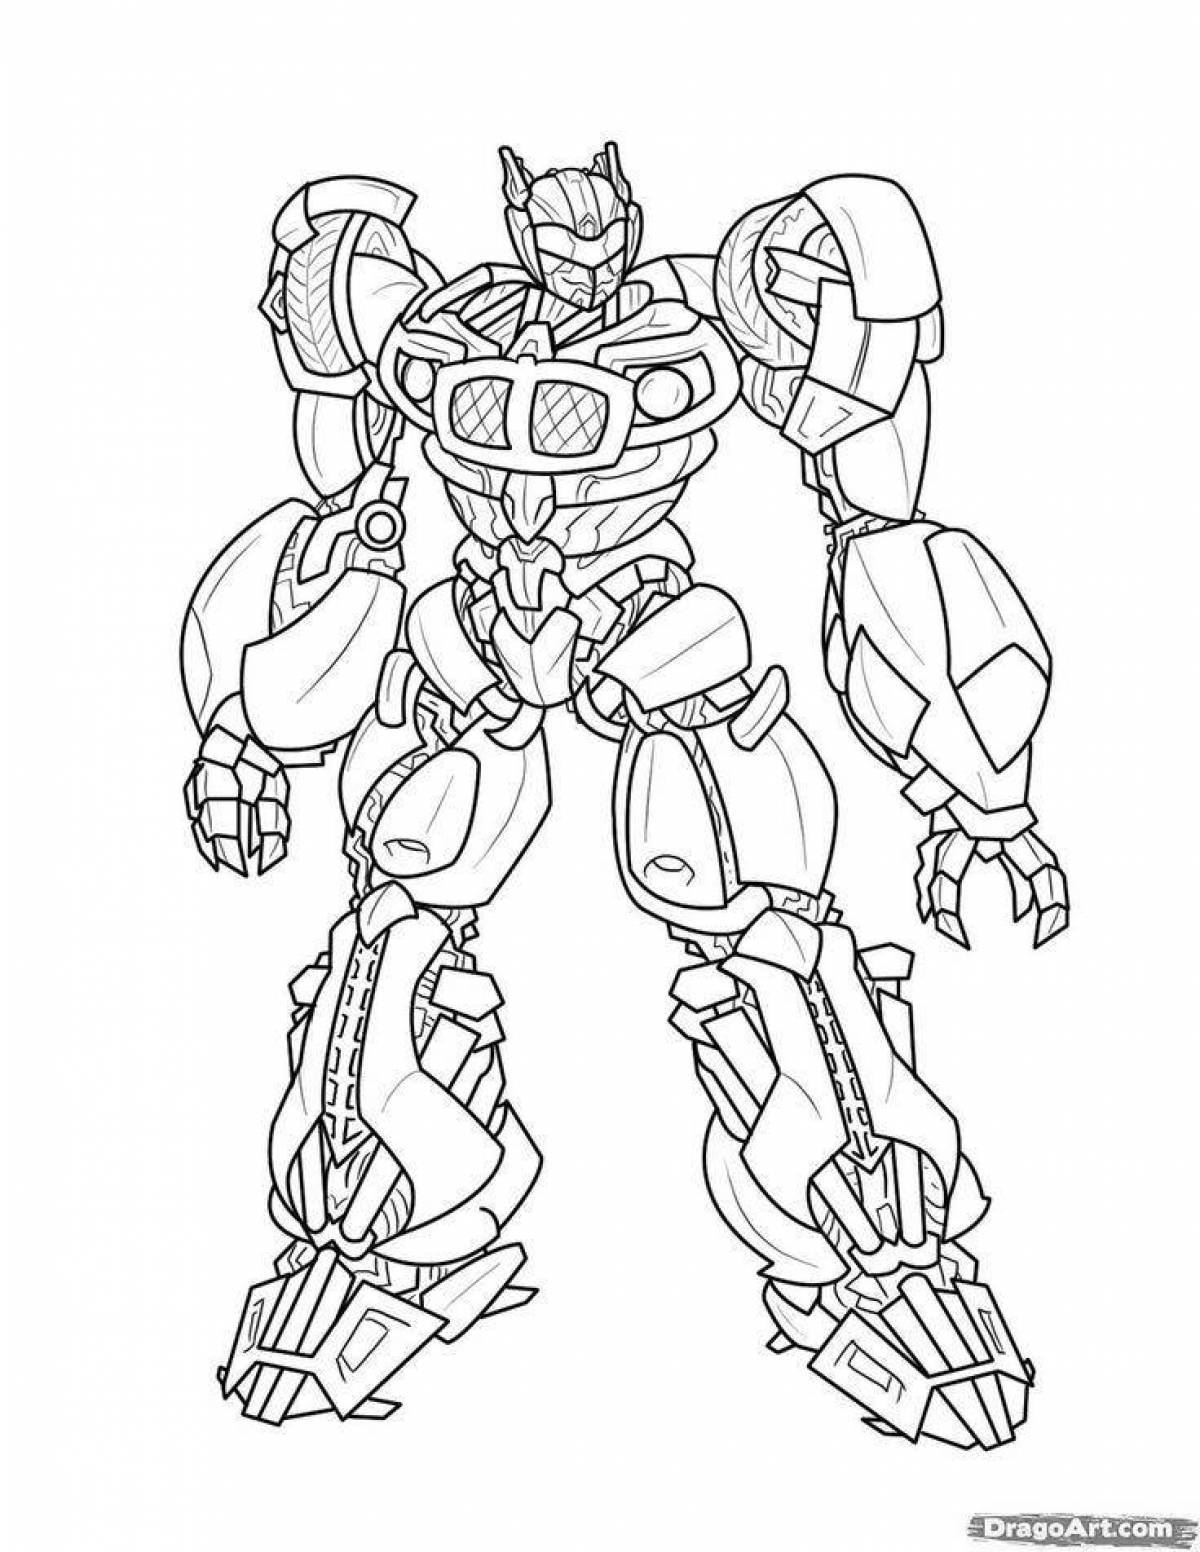 Impressive transformers coloring pages for boys